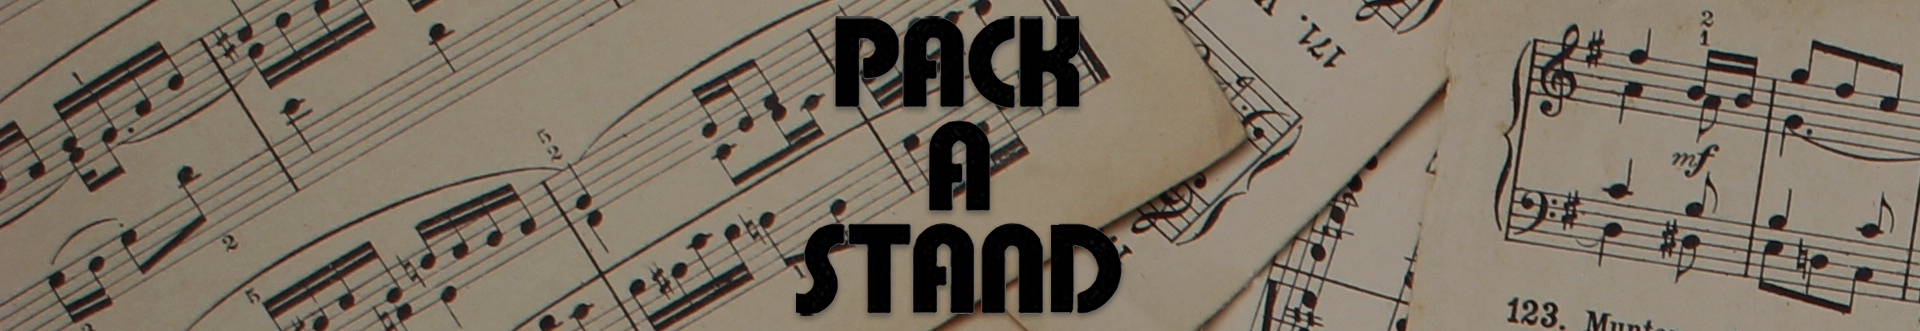 Pack-A-Stand